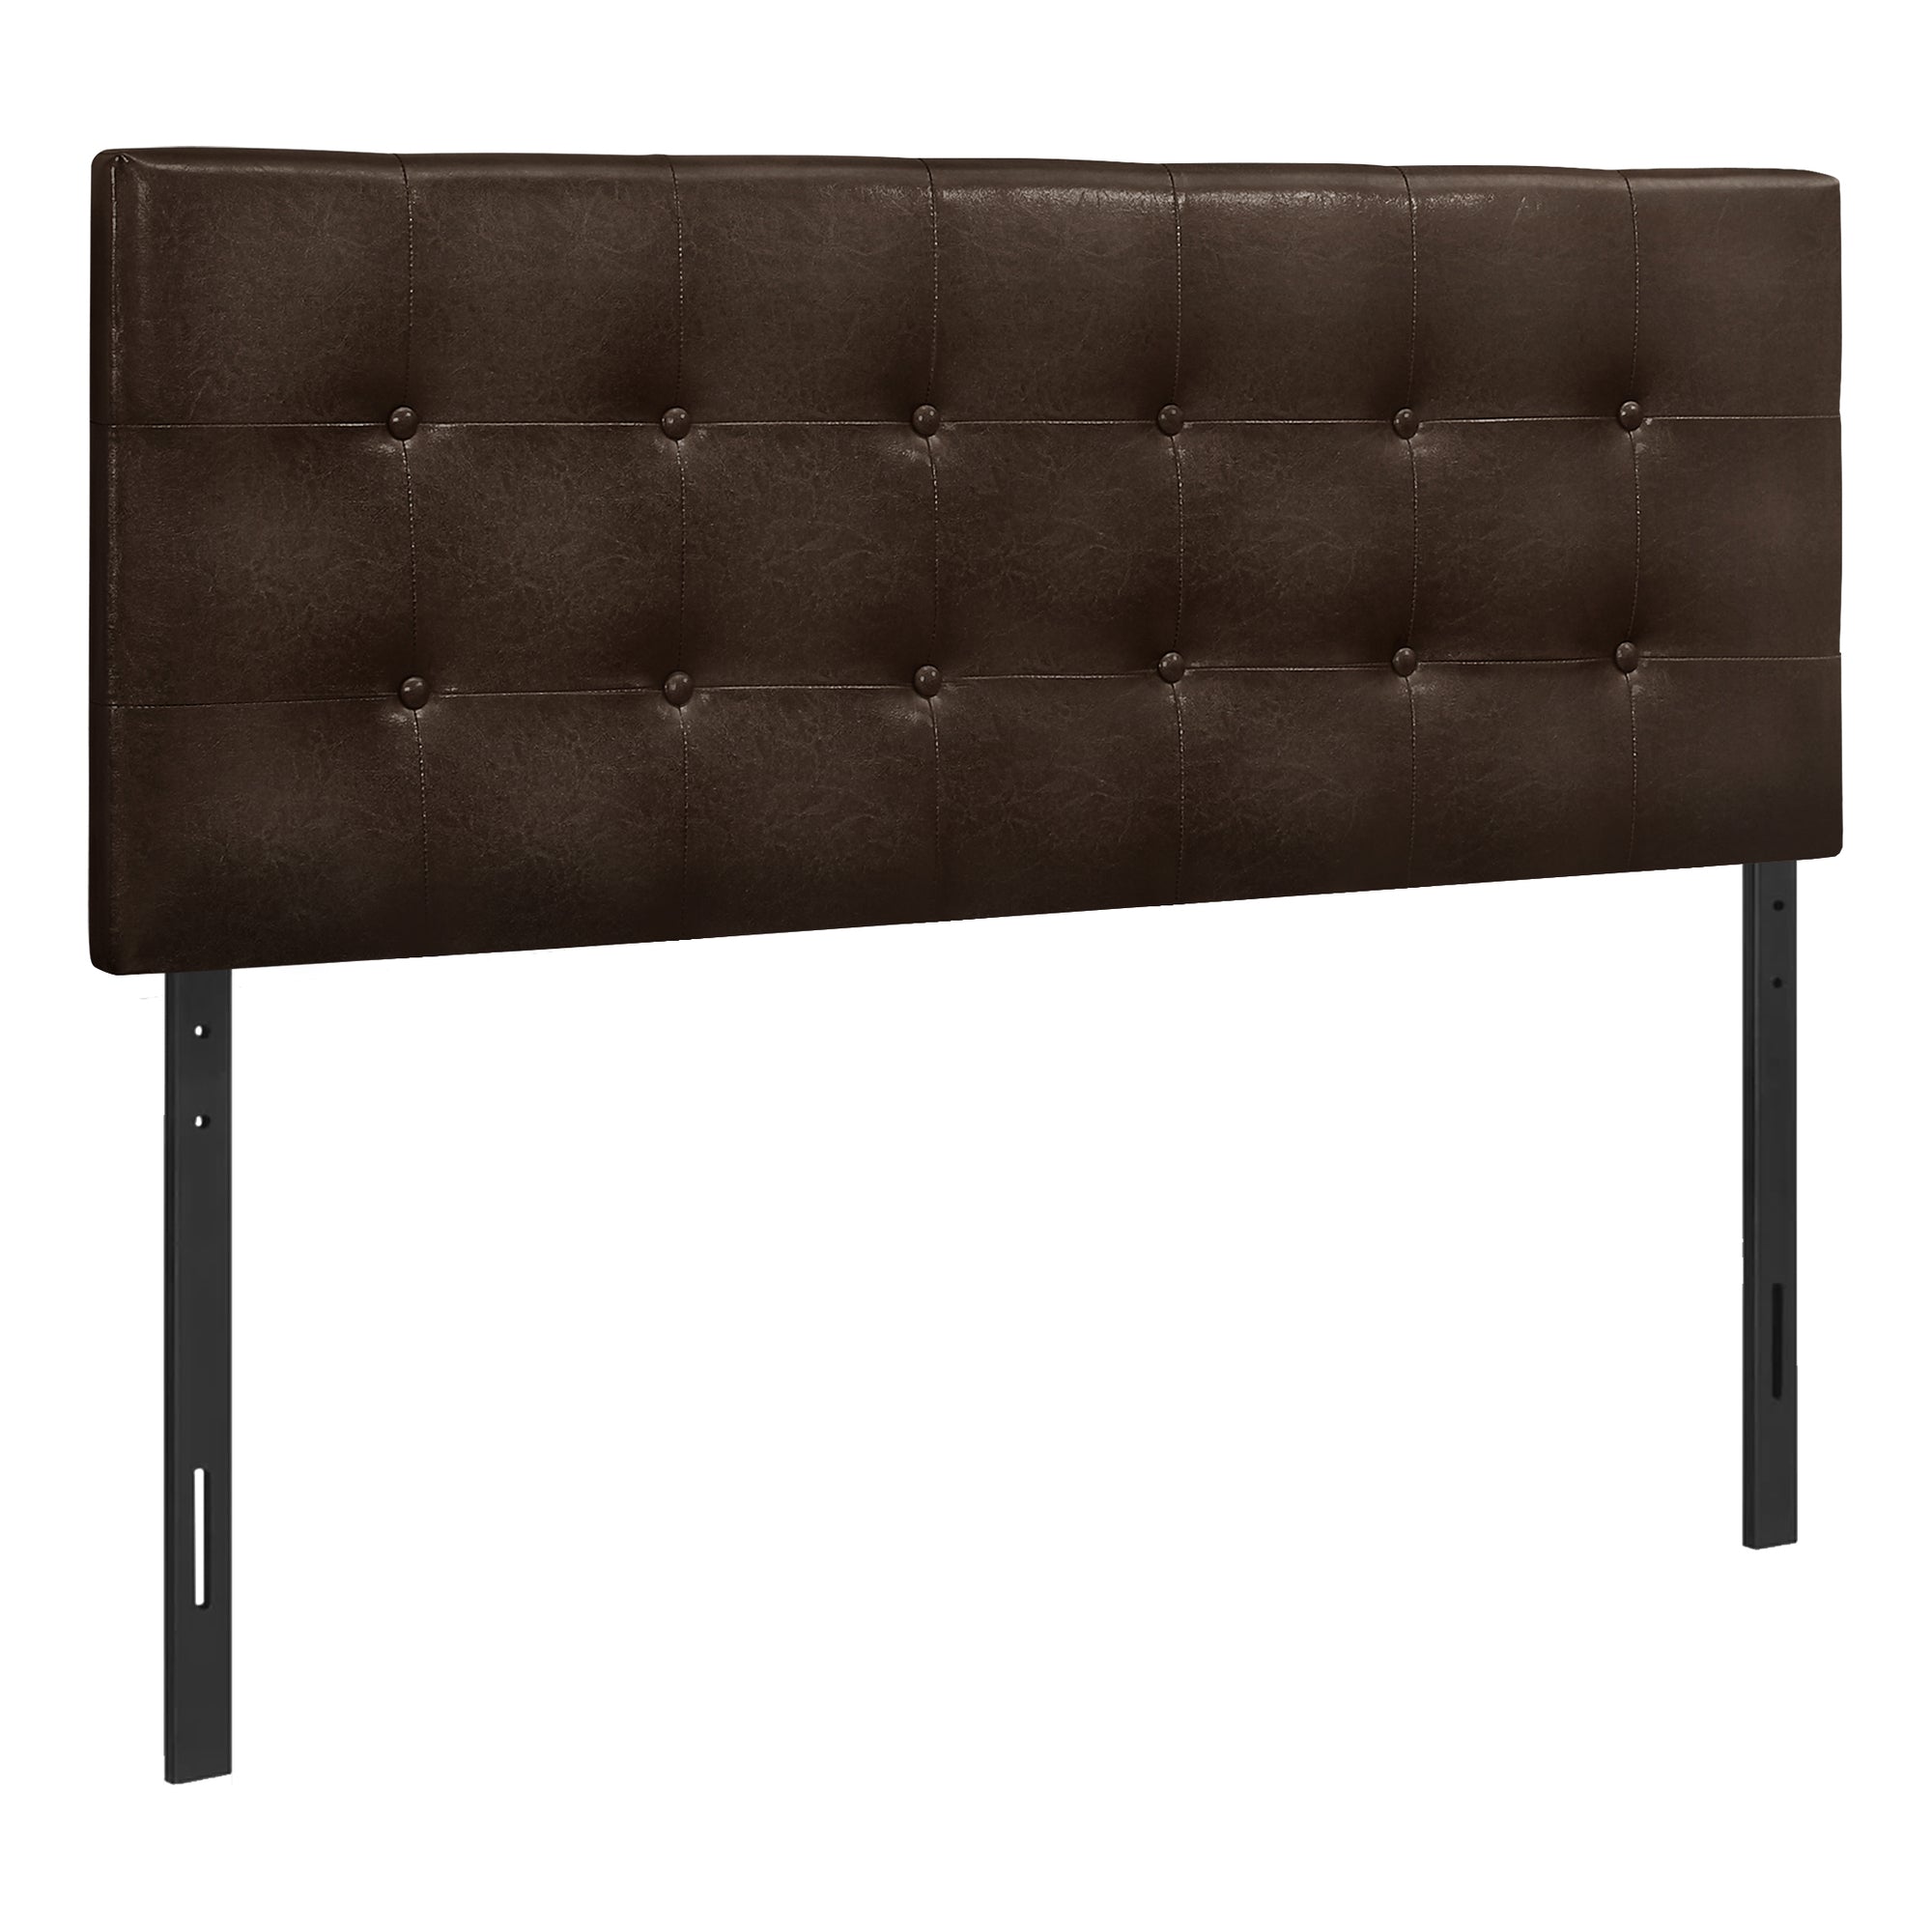 Bed - Full Size / Brown Leather-Look Headboard Only